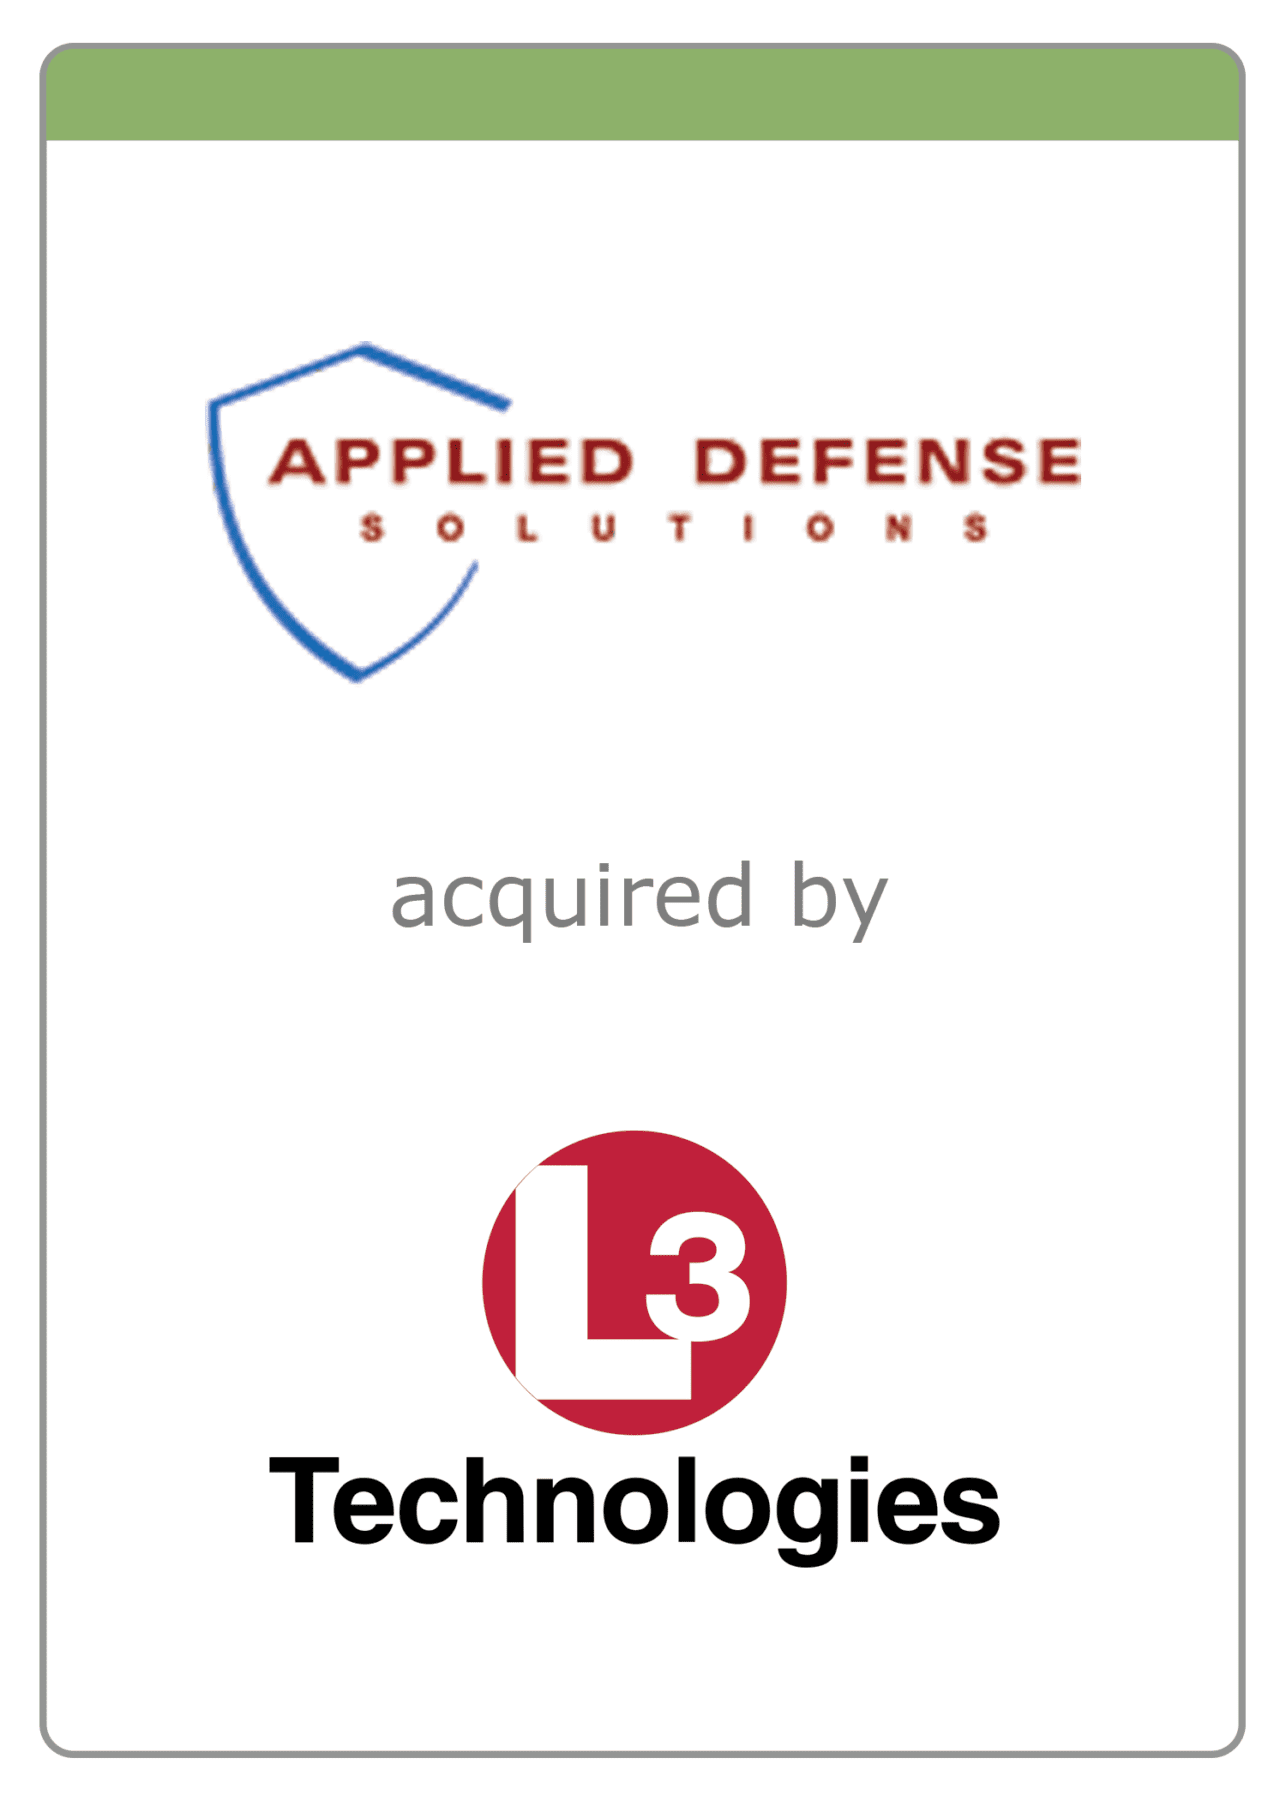 Applied Defense acquired by L3